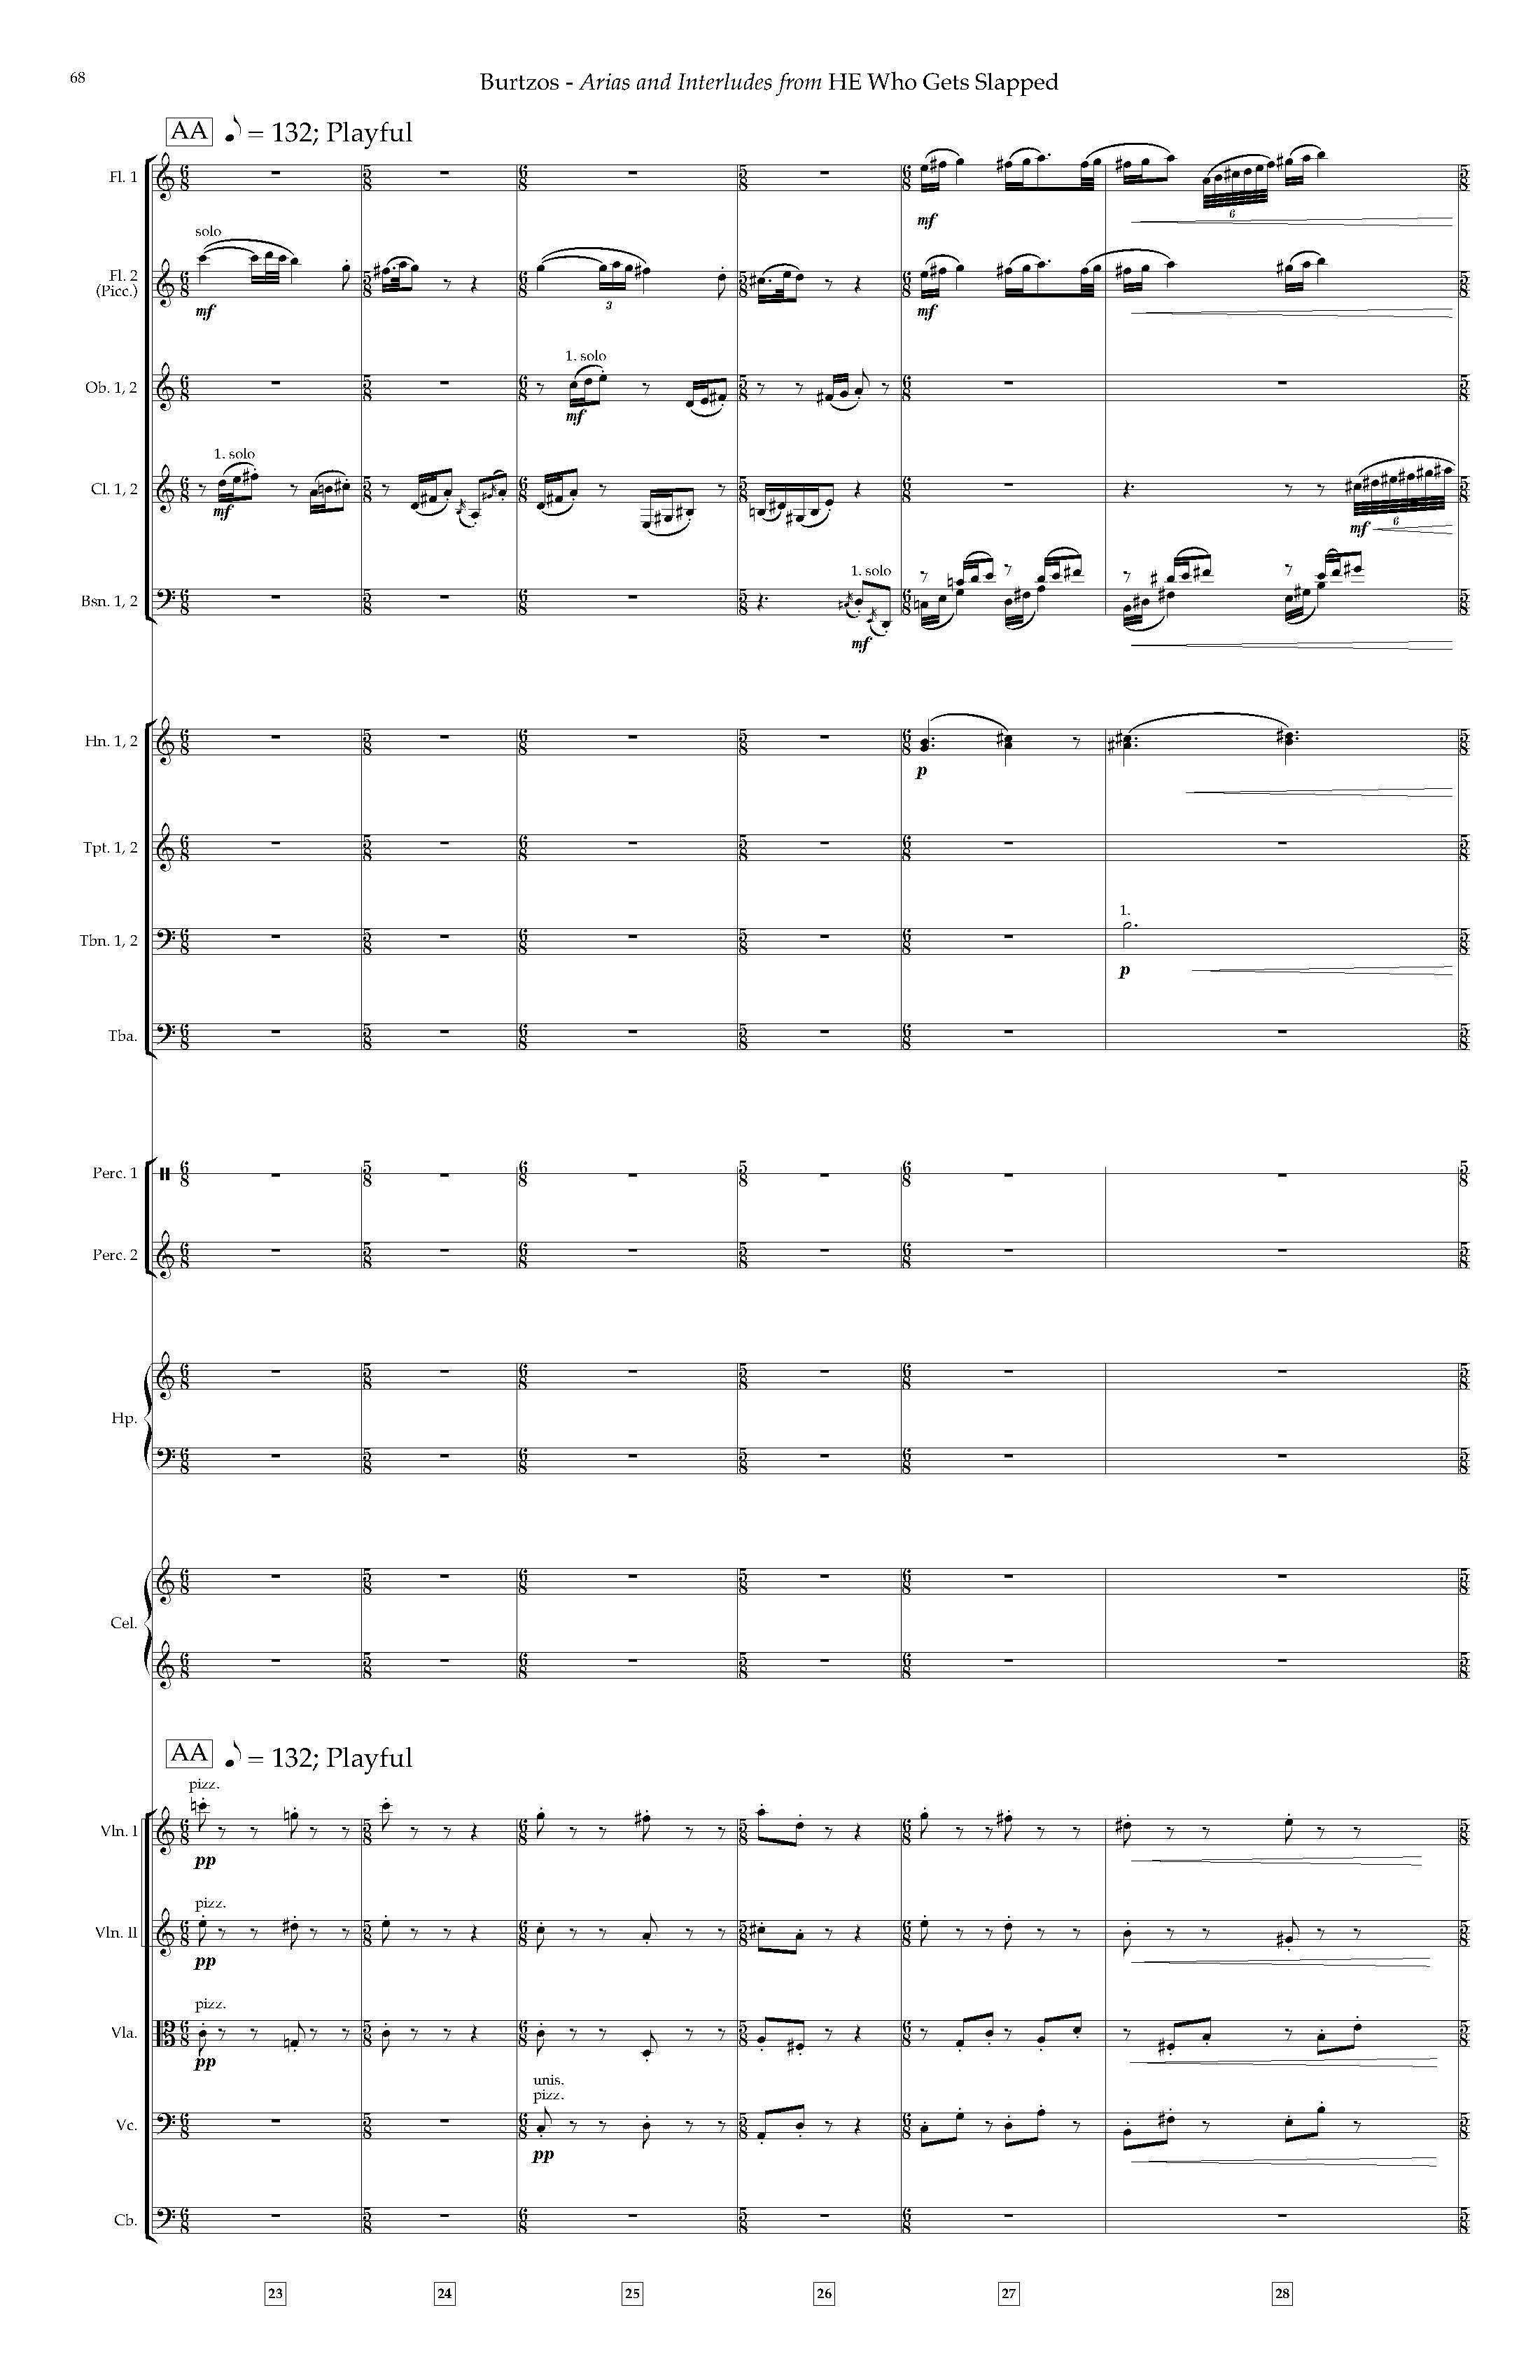 Arias and Interludes from HWGS - Complete Score_Page_74.jpg